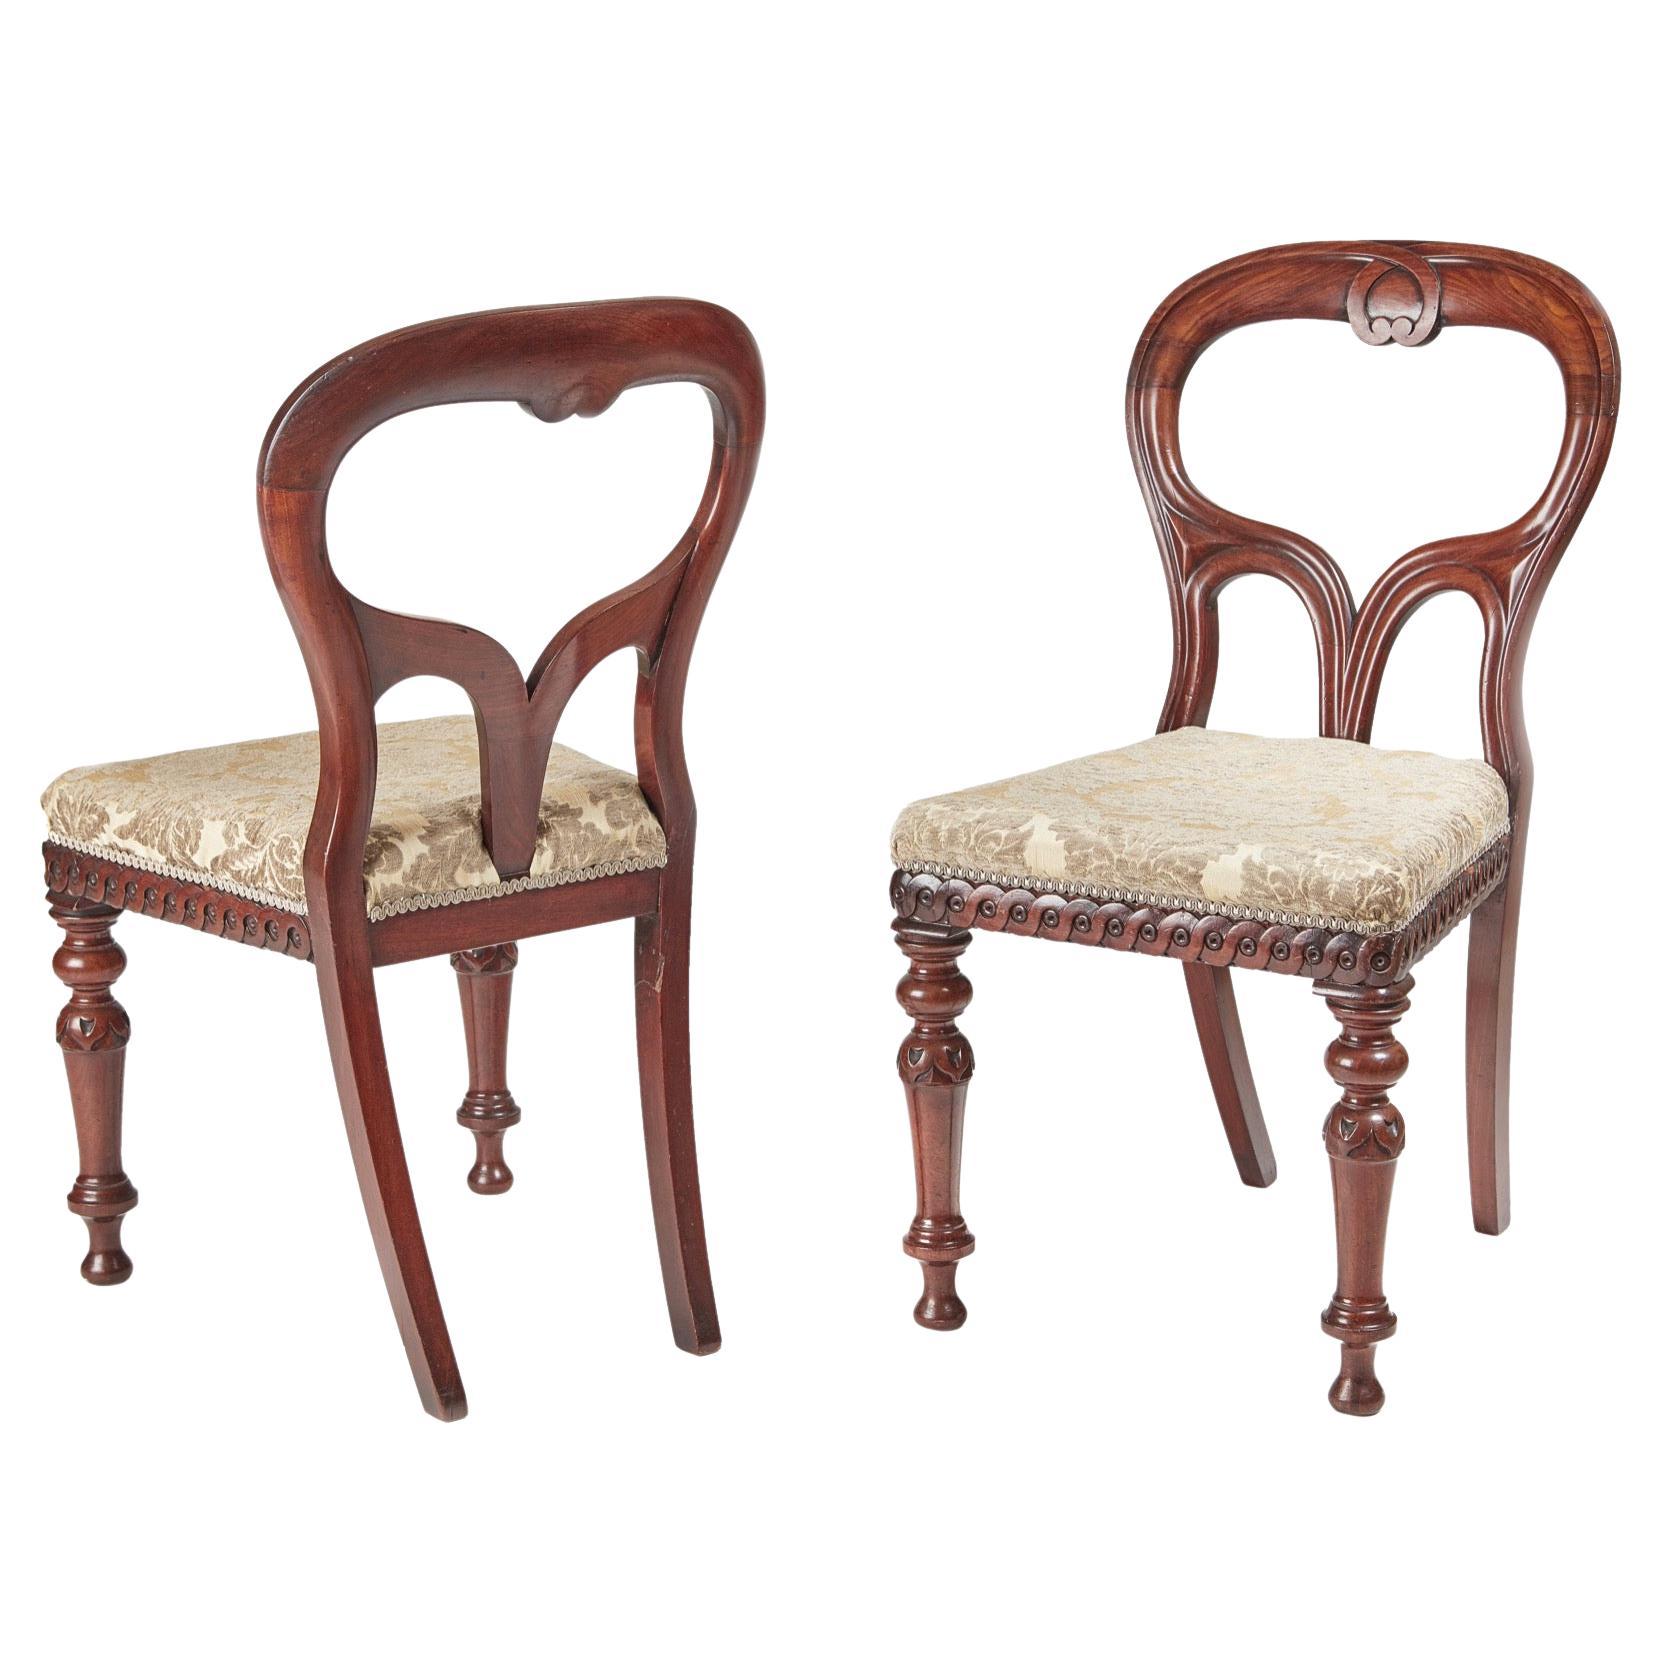 Outstanding Pair of Mahogany Balloon Back Side Chairs